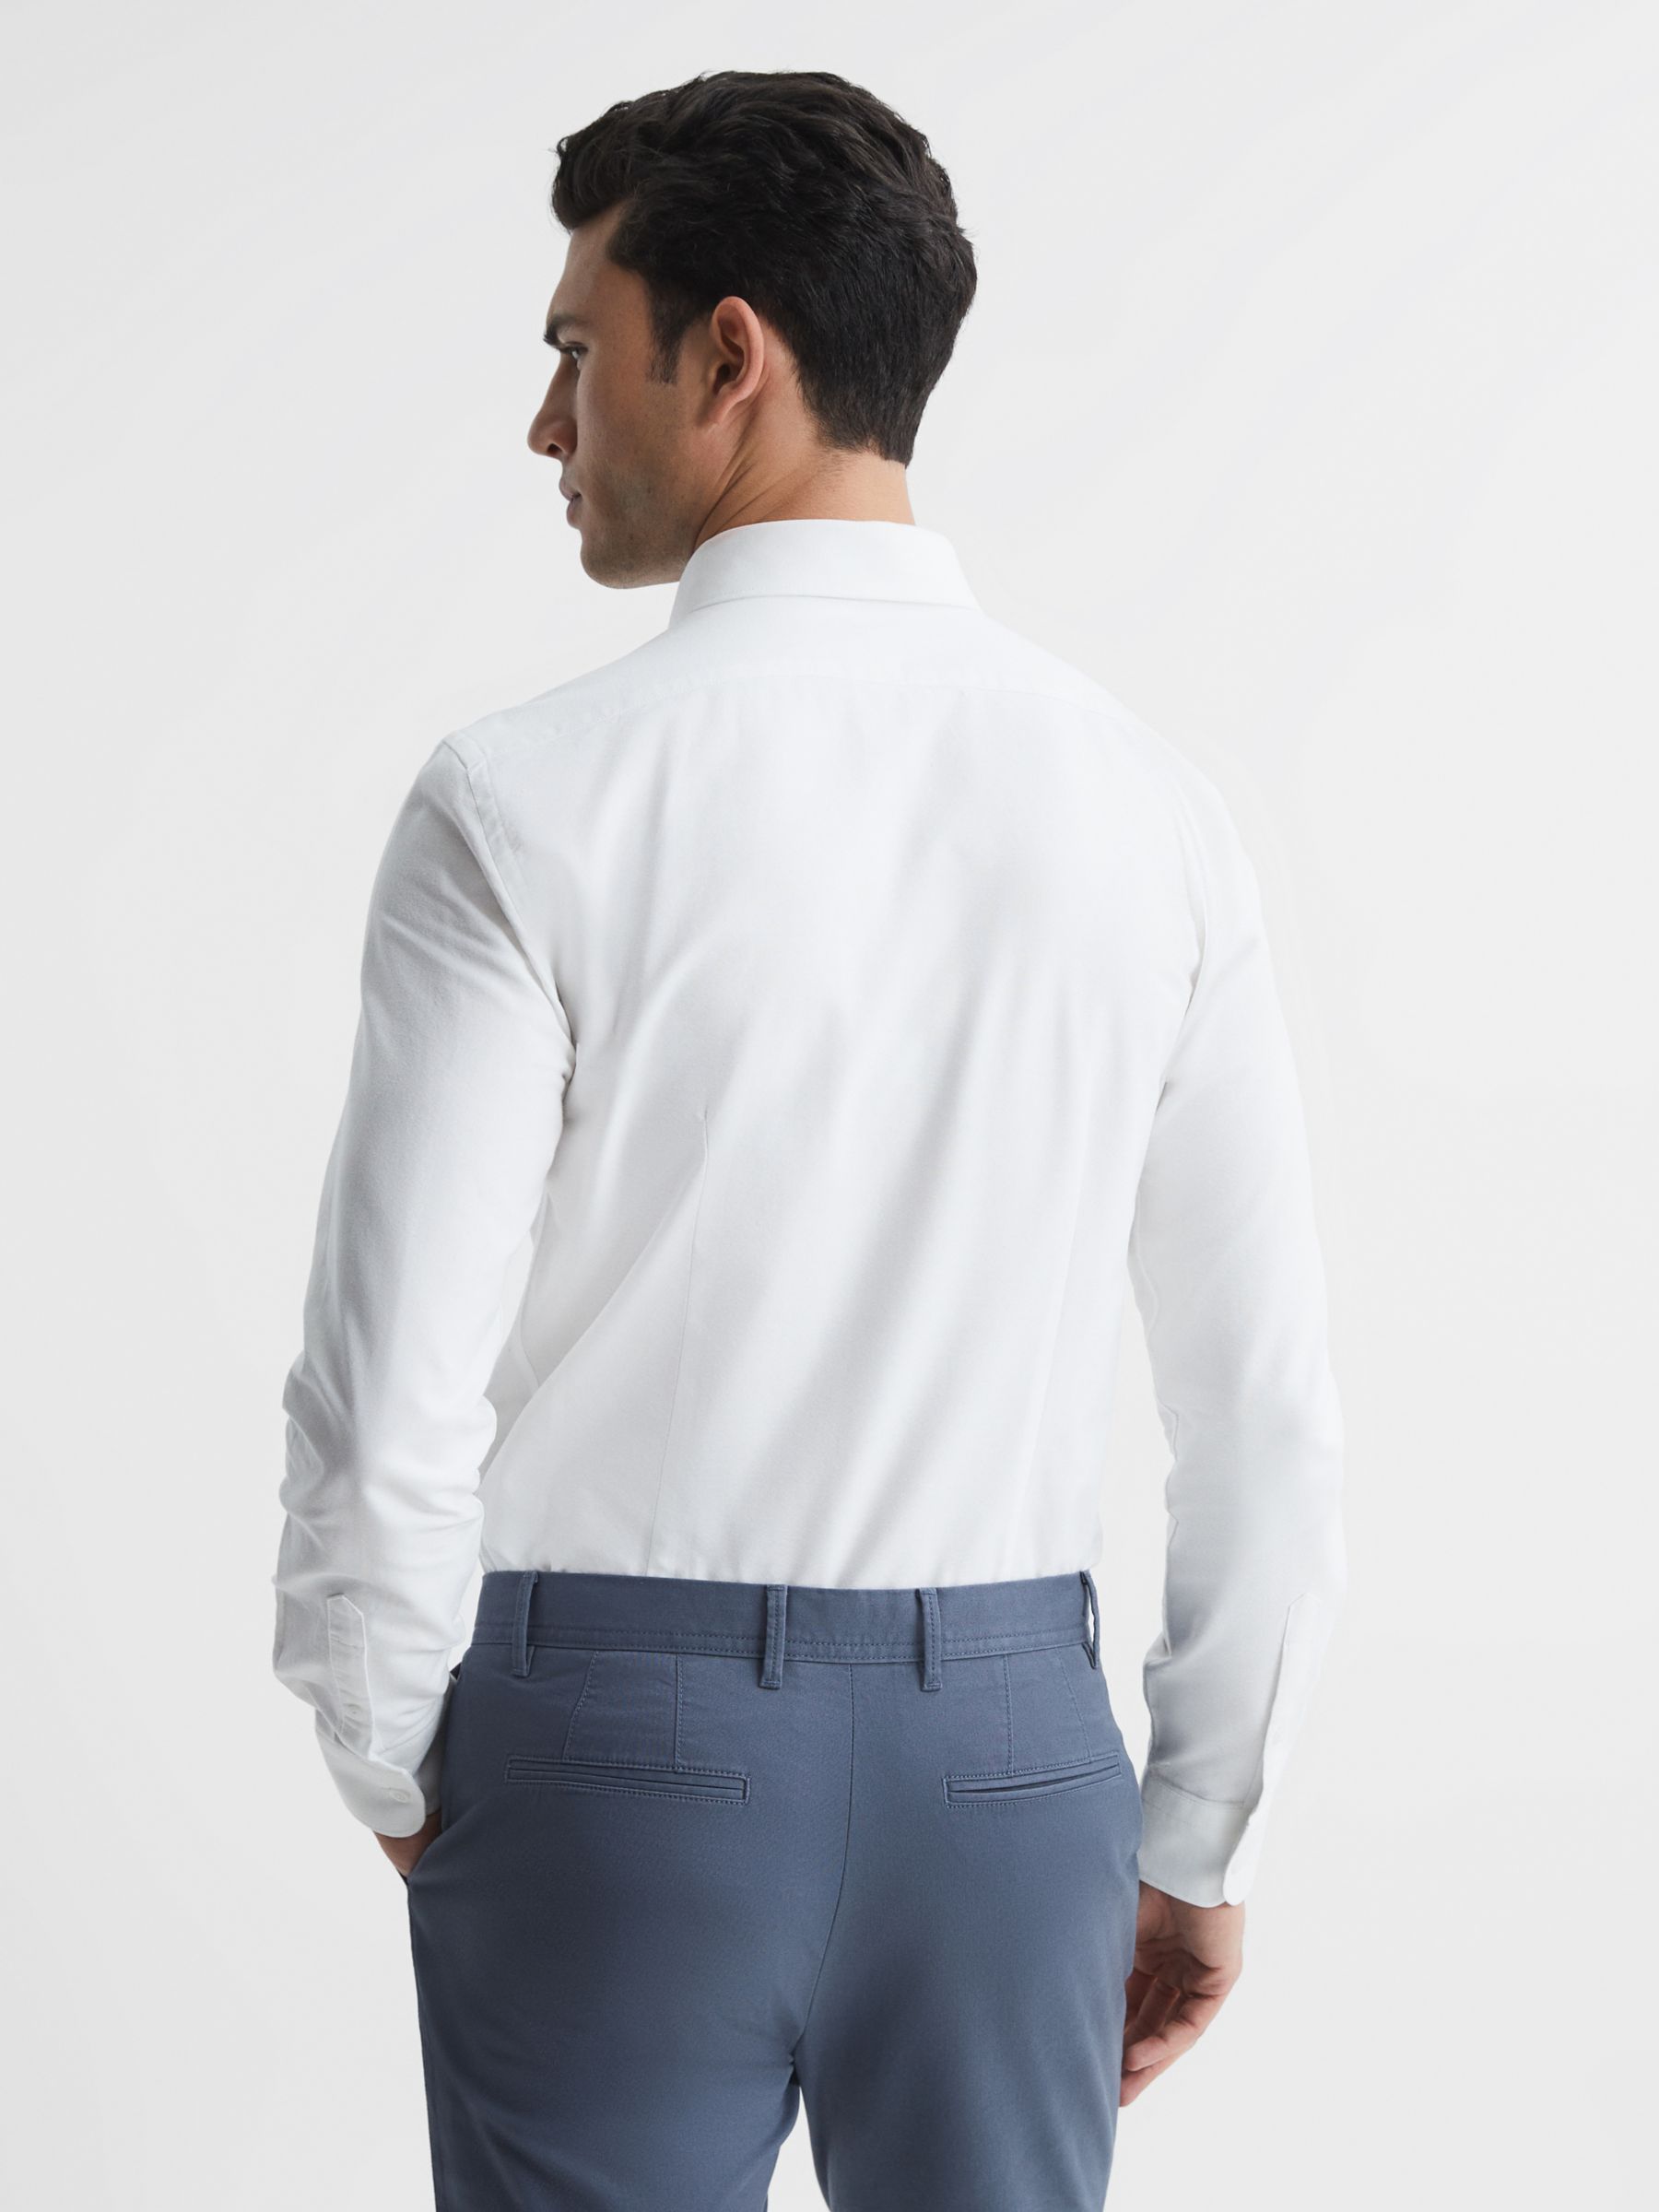 Buy Reiss Greenwich Long Sleeve Oxford Shirt, White Online at johnlewis.com